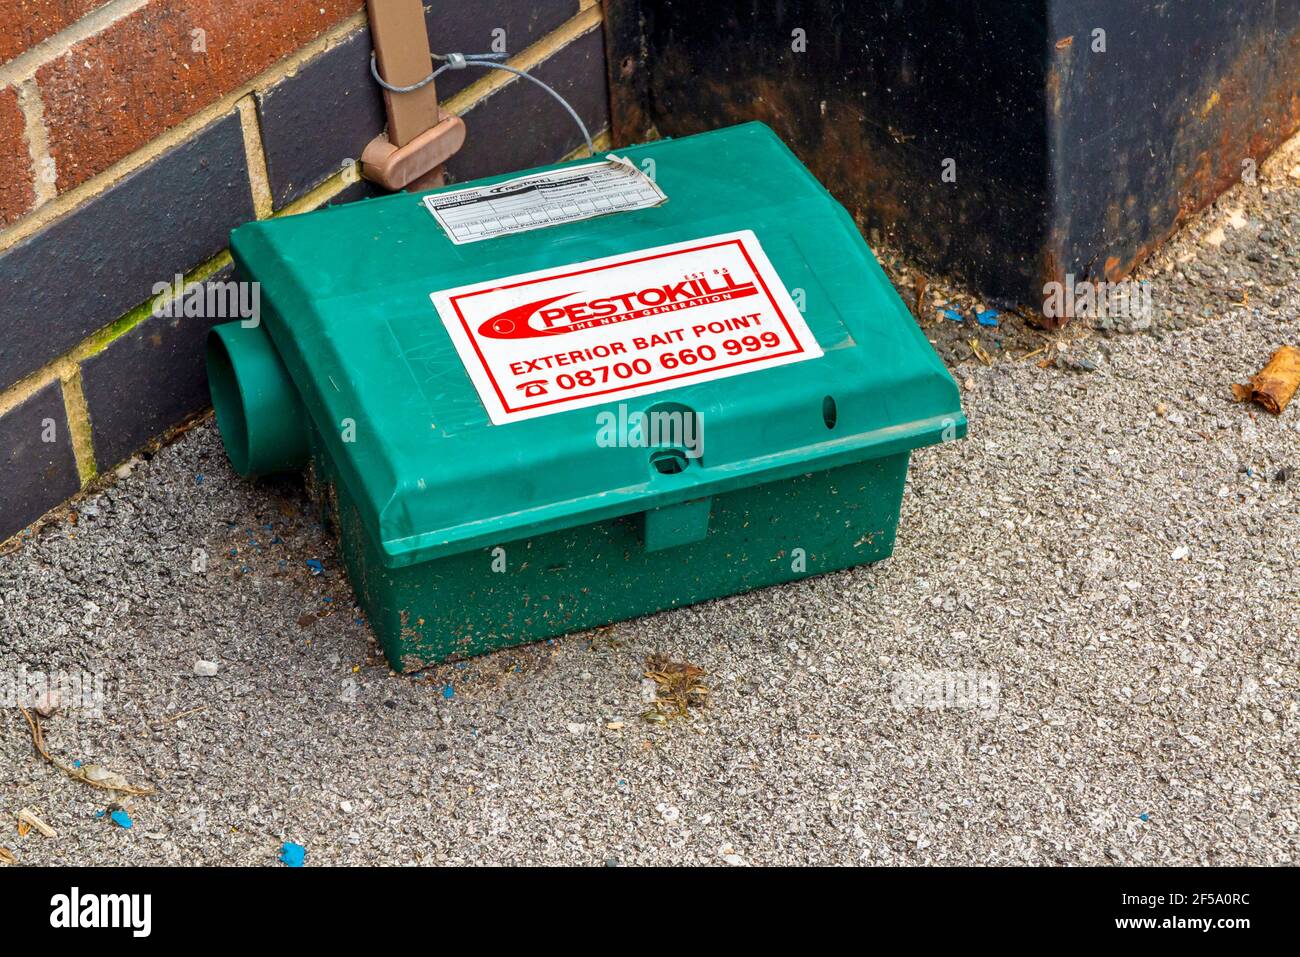 Plastic exterior bait point container used to poison rats outside a shop supplied by Pestokill a UK company providing pest control services. Stock Photo